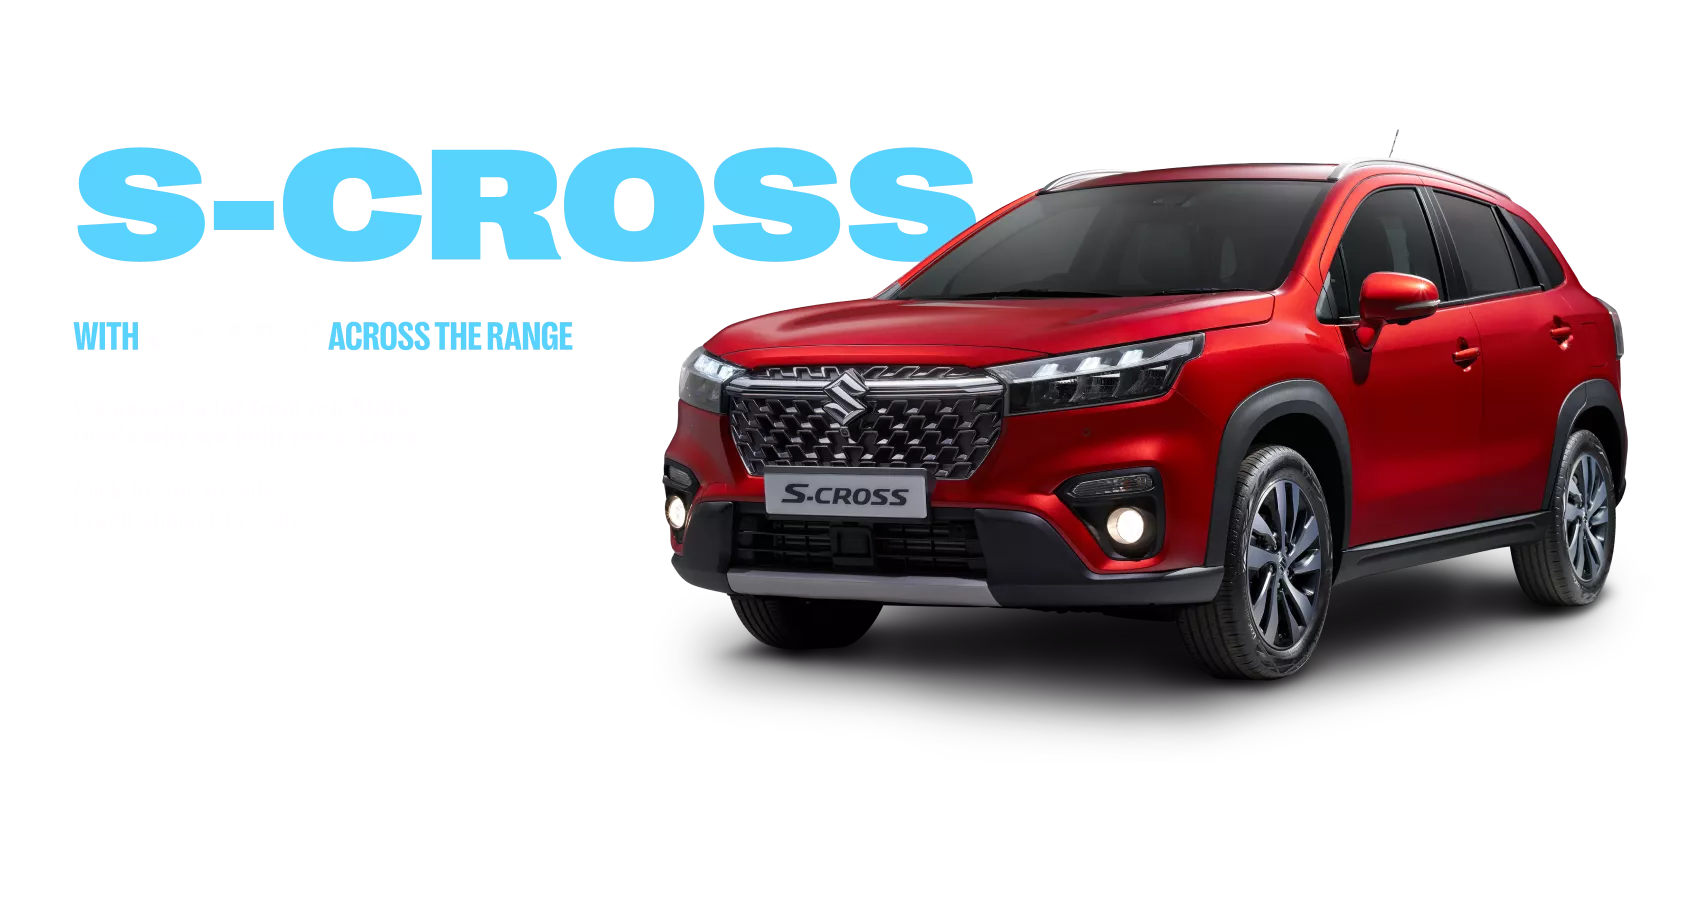 S-CROSS with 0% APR*